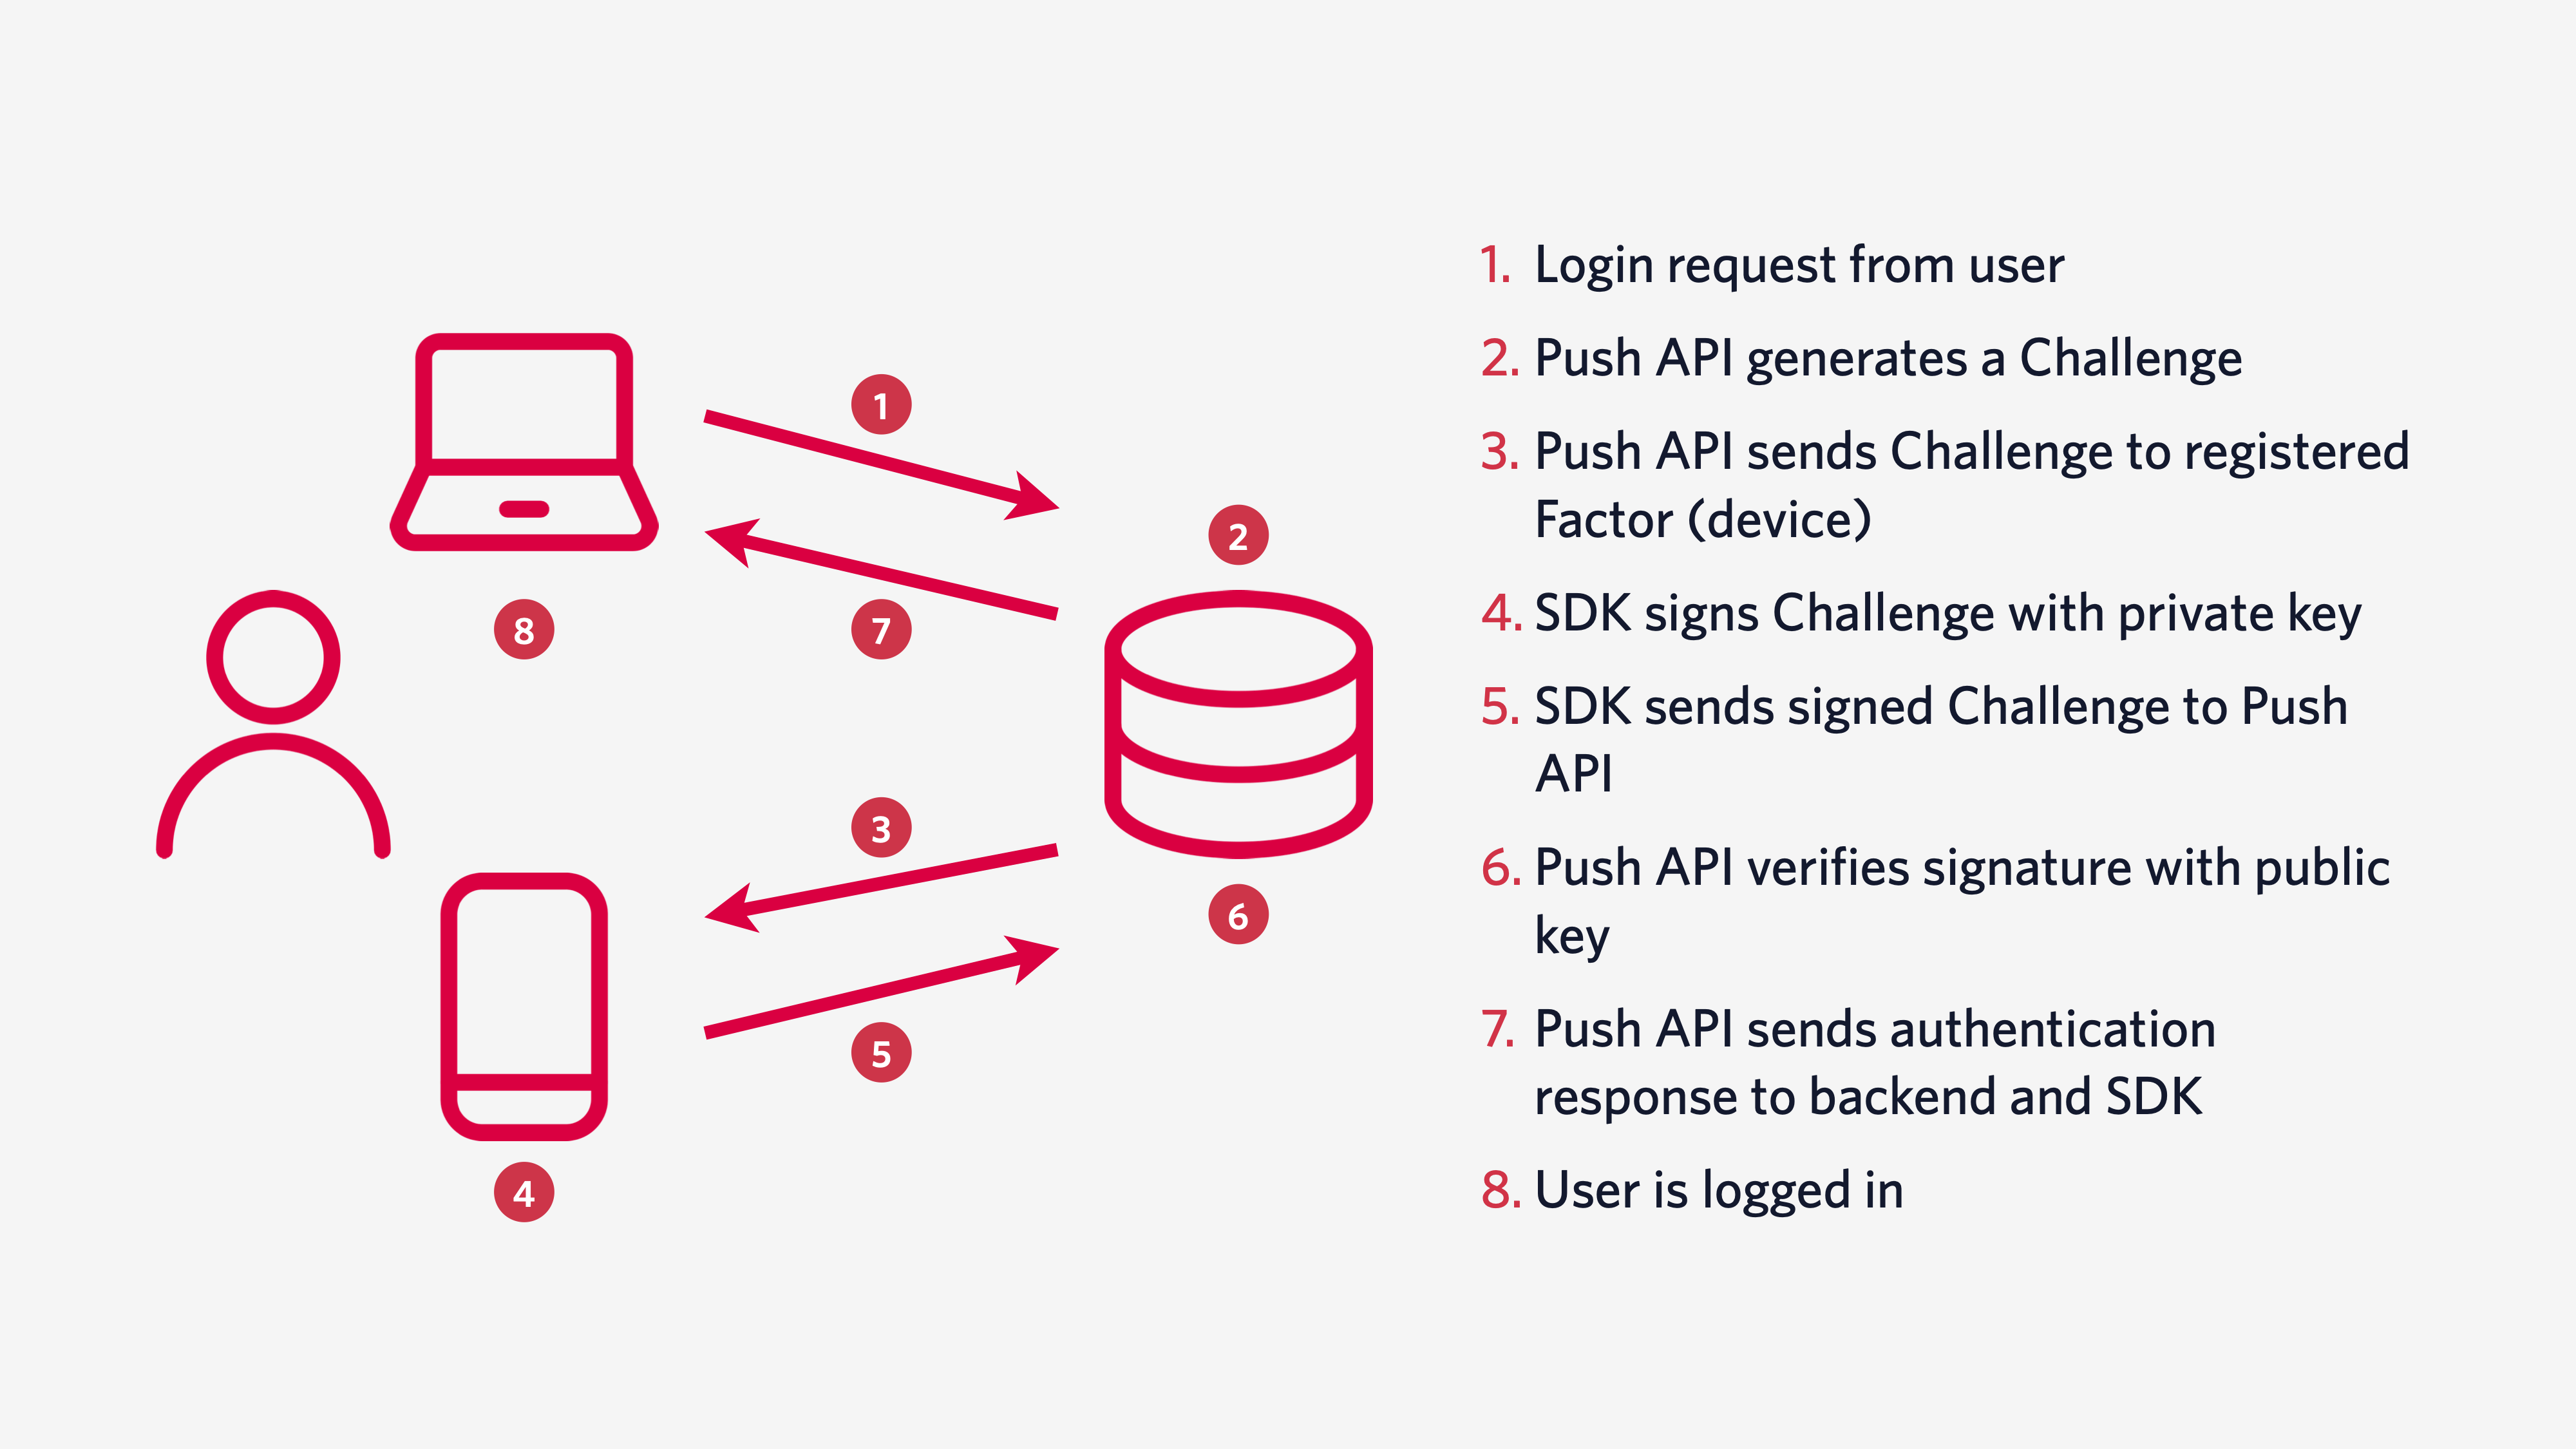 Diagram of how push authentication works. 1. Login request from user 2. Push API generates a Challenge 3. Push API sends Challenge to registered Factor (device) 4. SDK signs Challenge with private key 5. SDK sends signed Challenge to Push API 6. Push API verifies signature with public key 7. Push API sends authentication response to backend and SDK. 8. User is logged in.